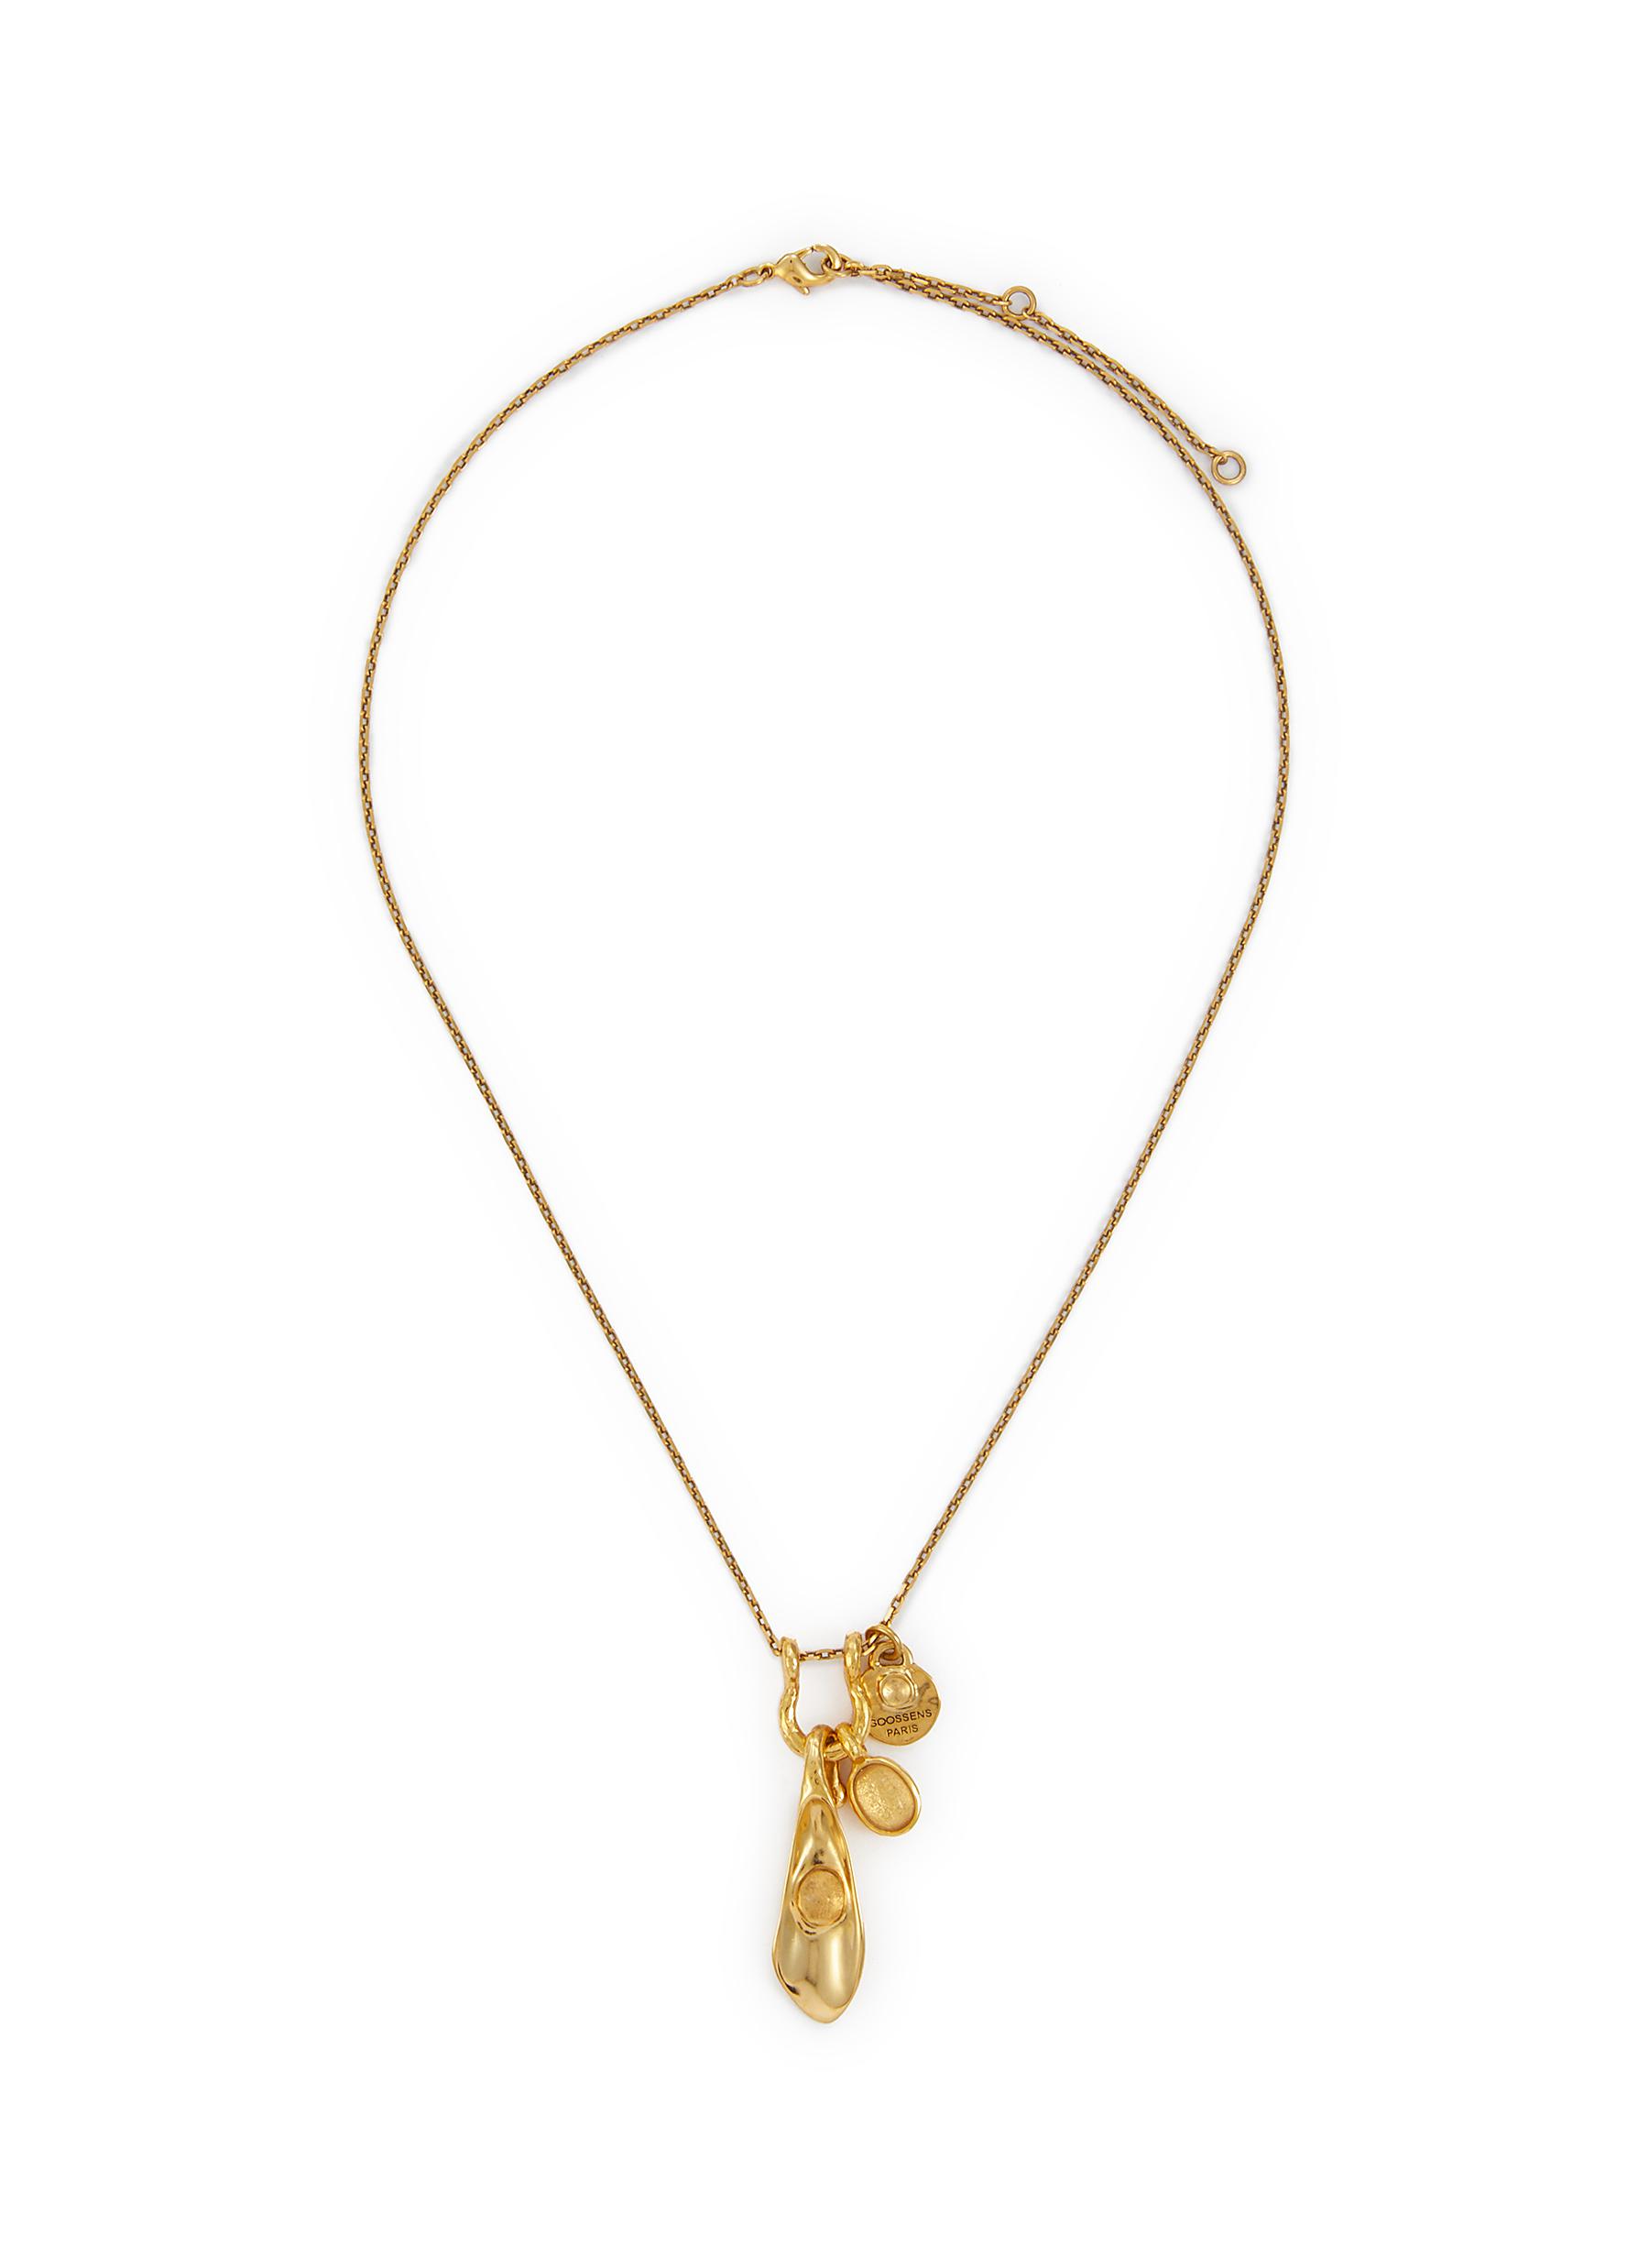 Foliage 24k Gold Plated Necklace